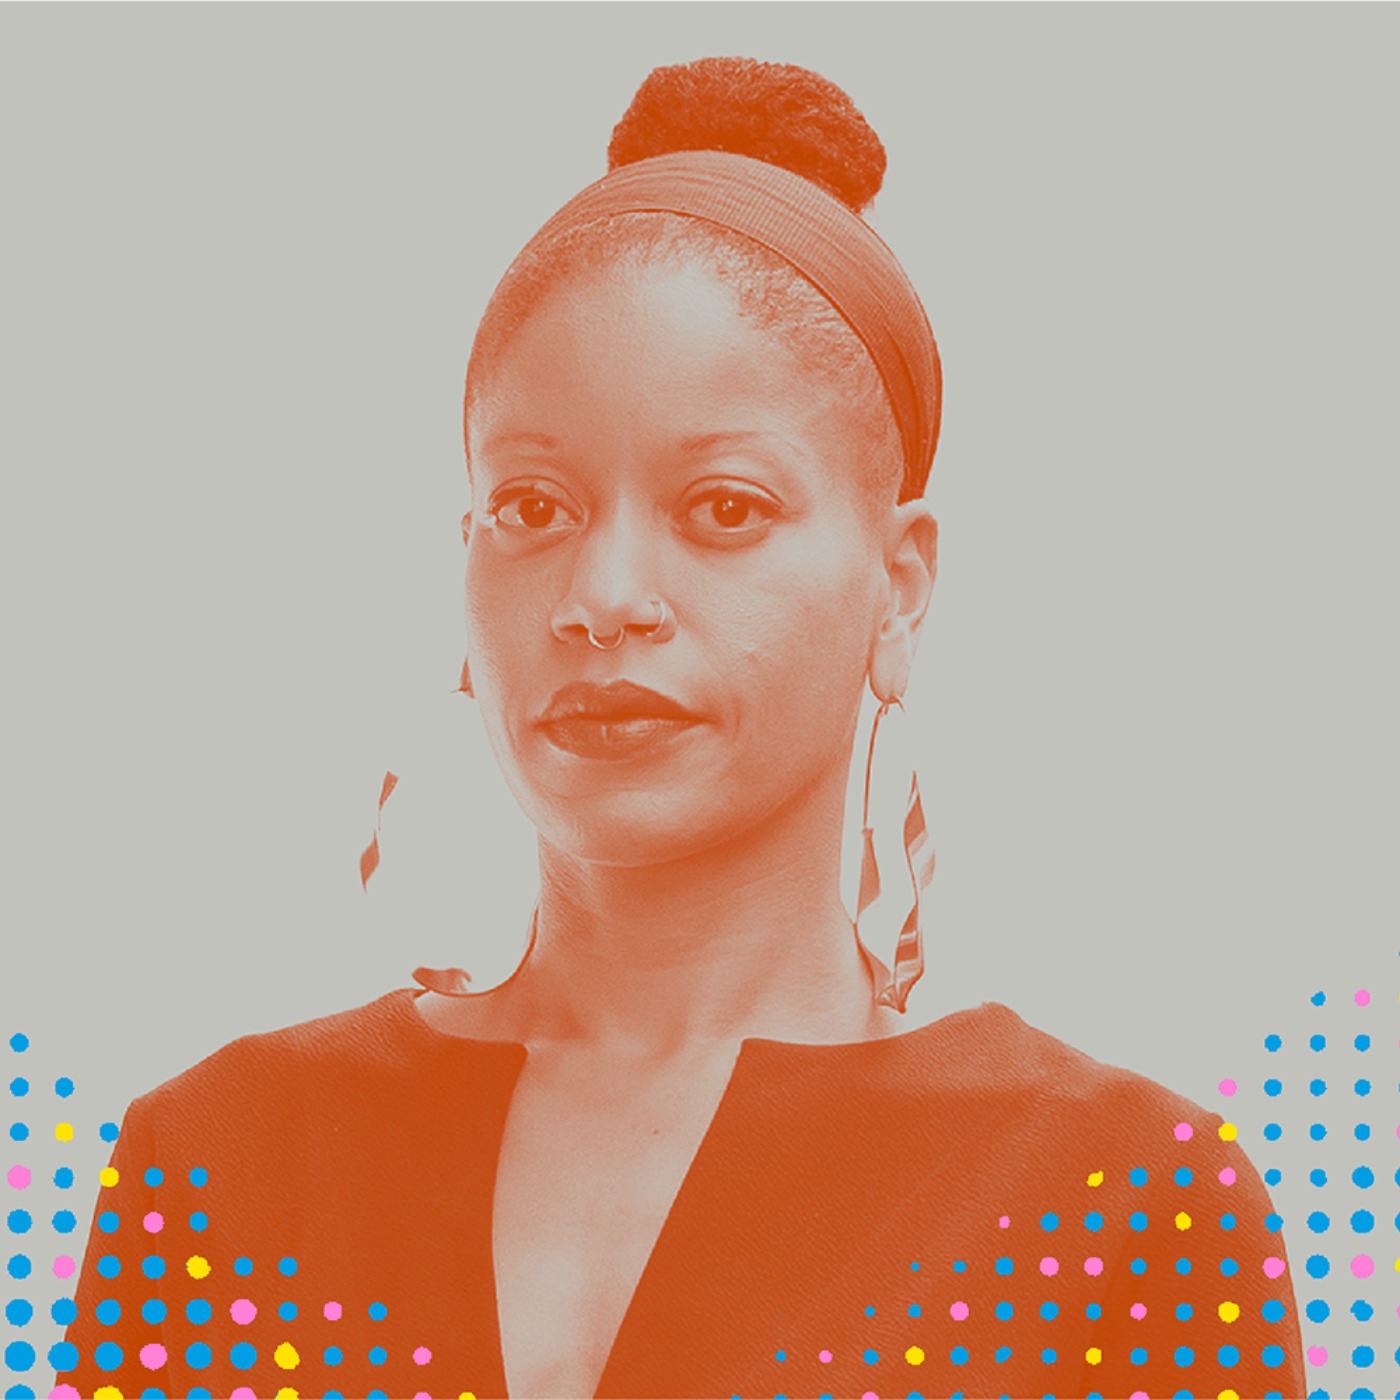 106: 'Be the Change': Khiara M. Bridges on claiming her voice as a prominent Black woman